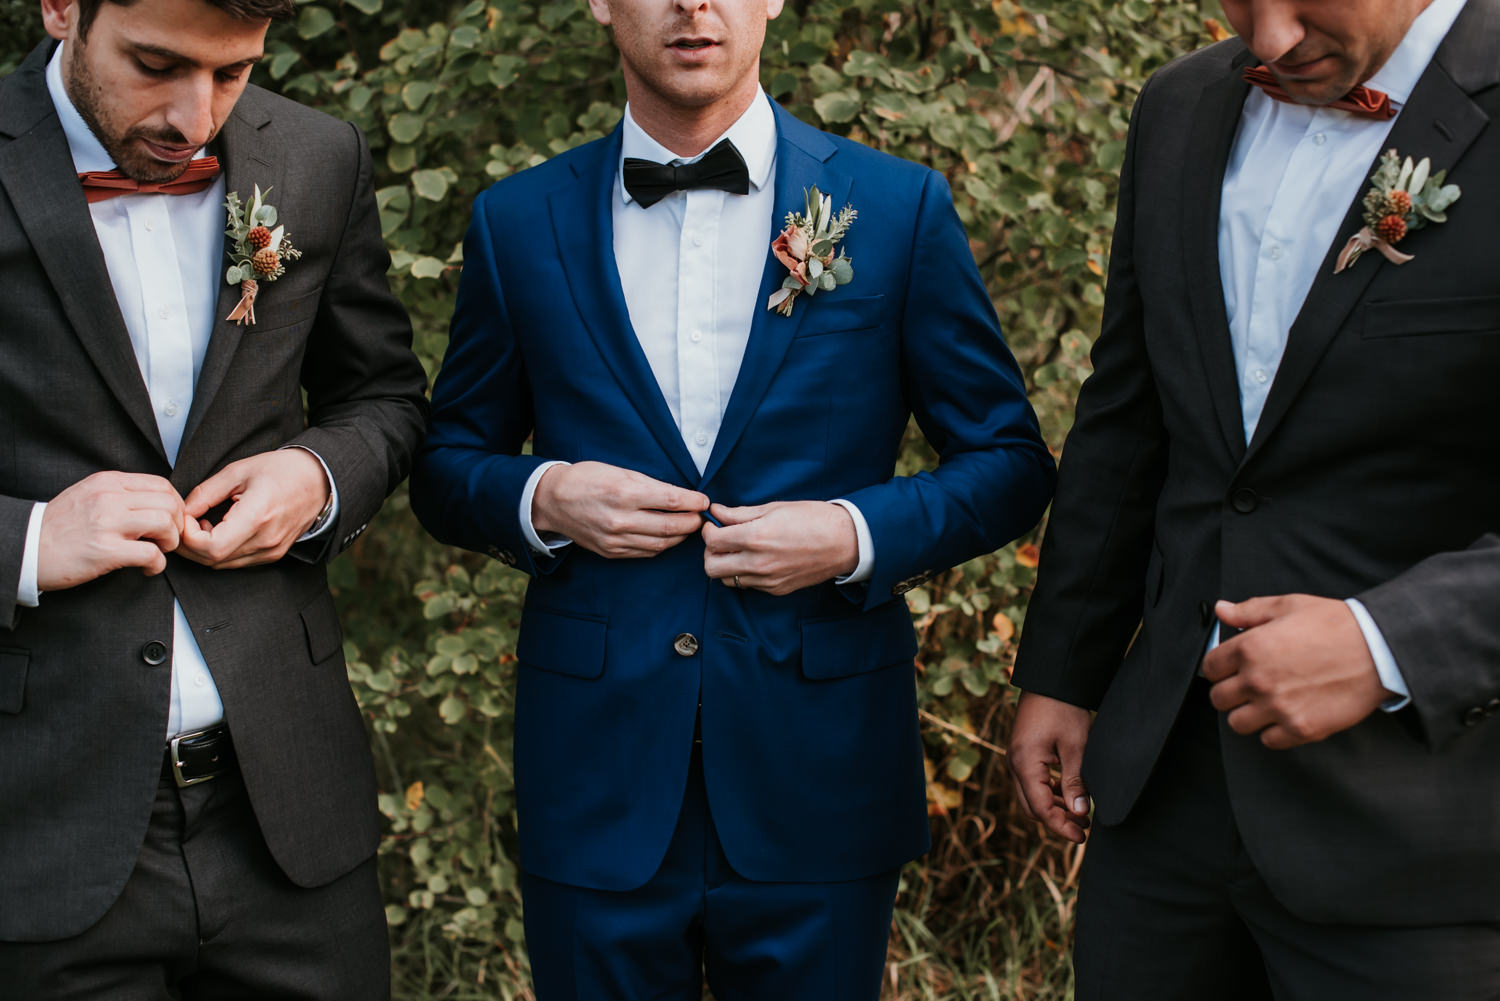 Grooms suit from Indochino and tie from Beaux Ties